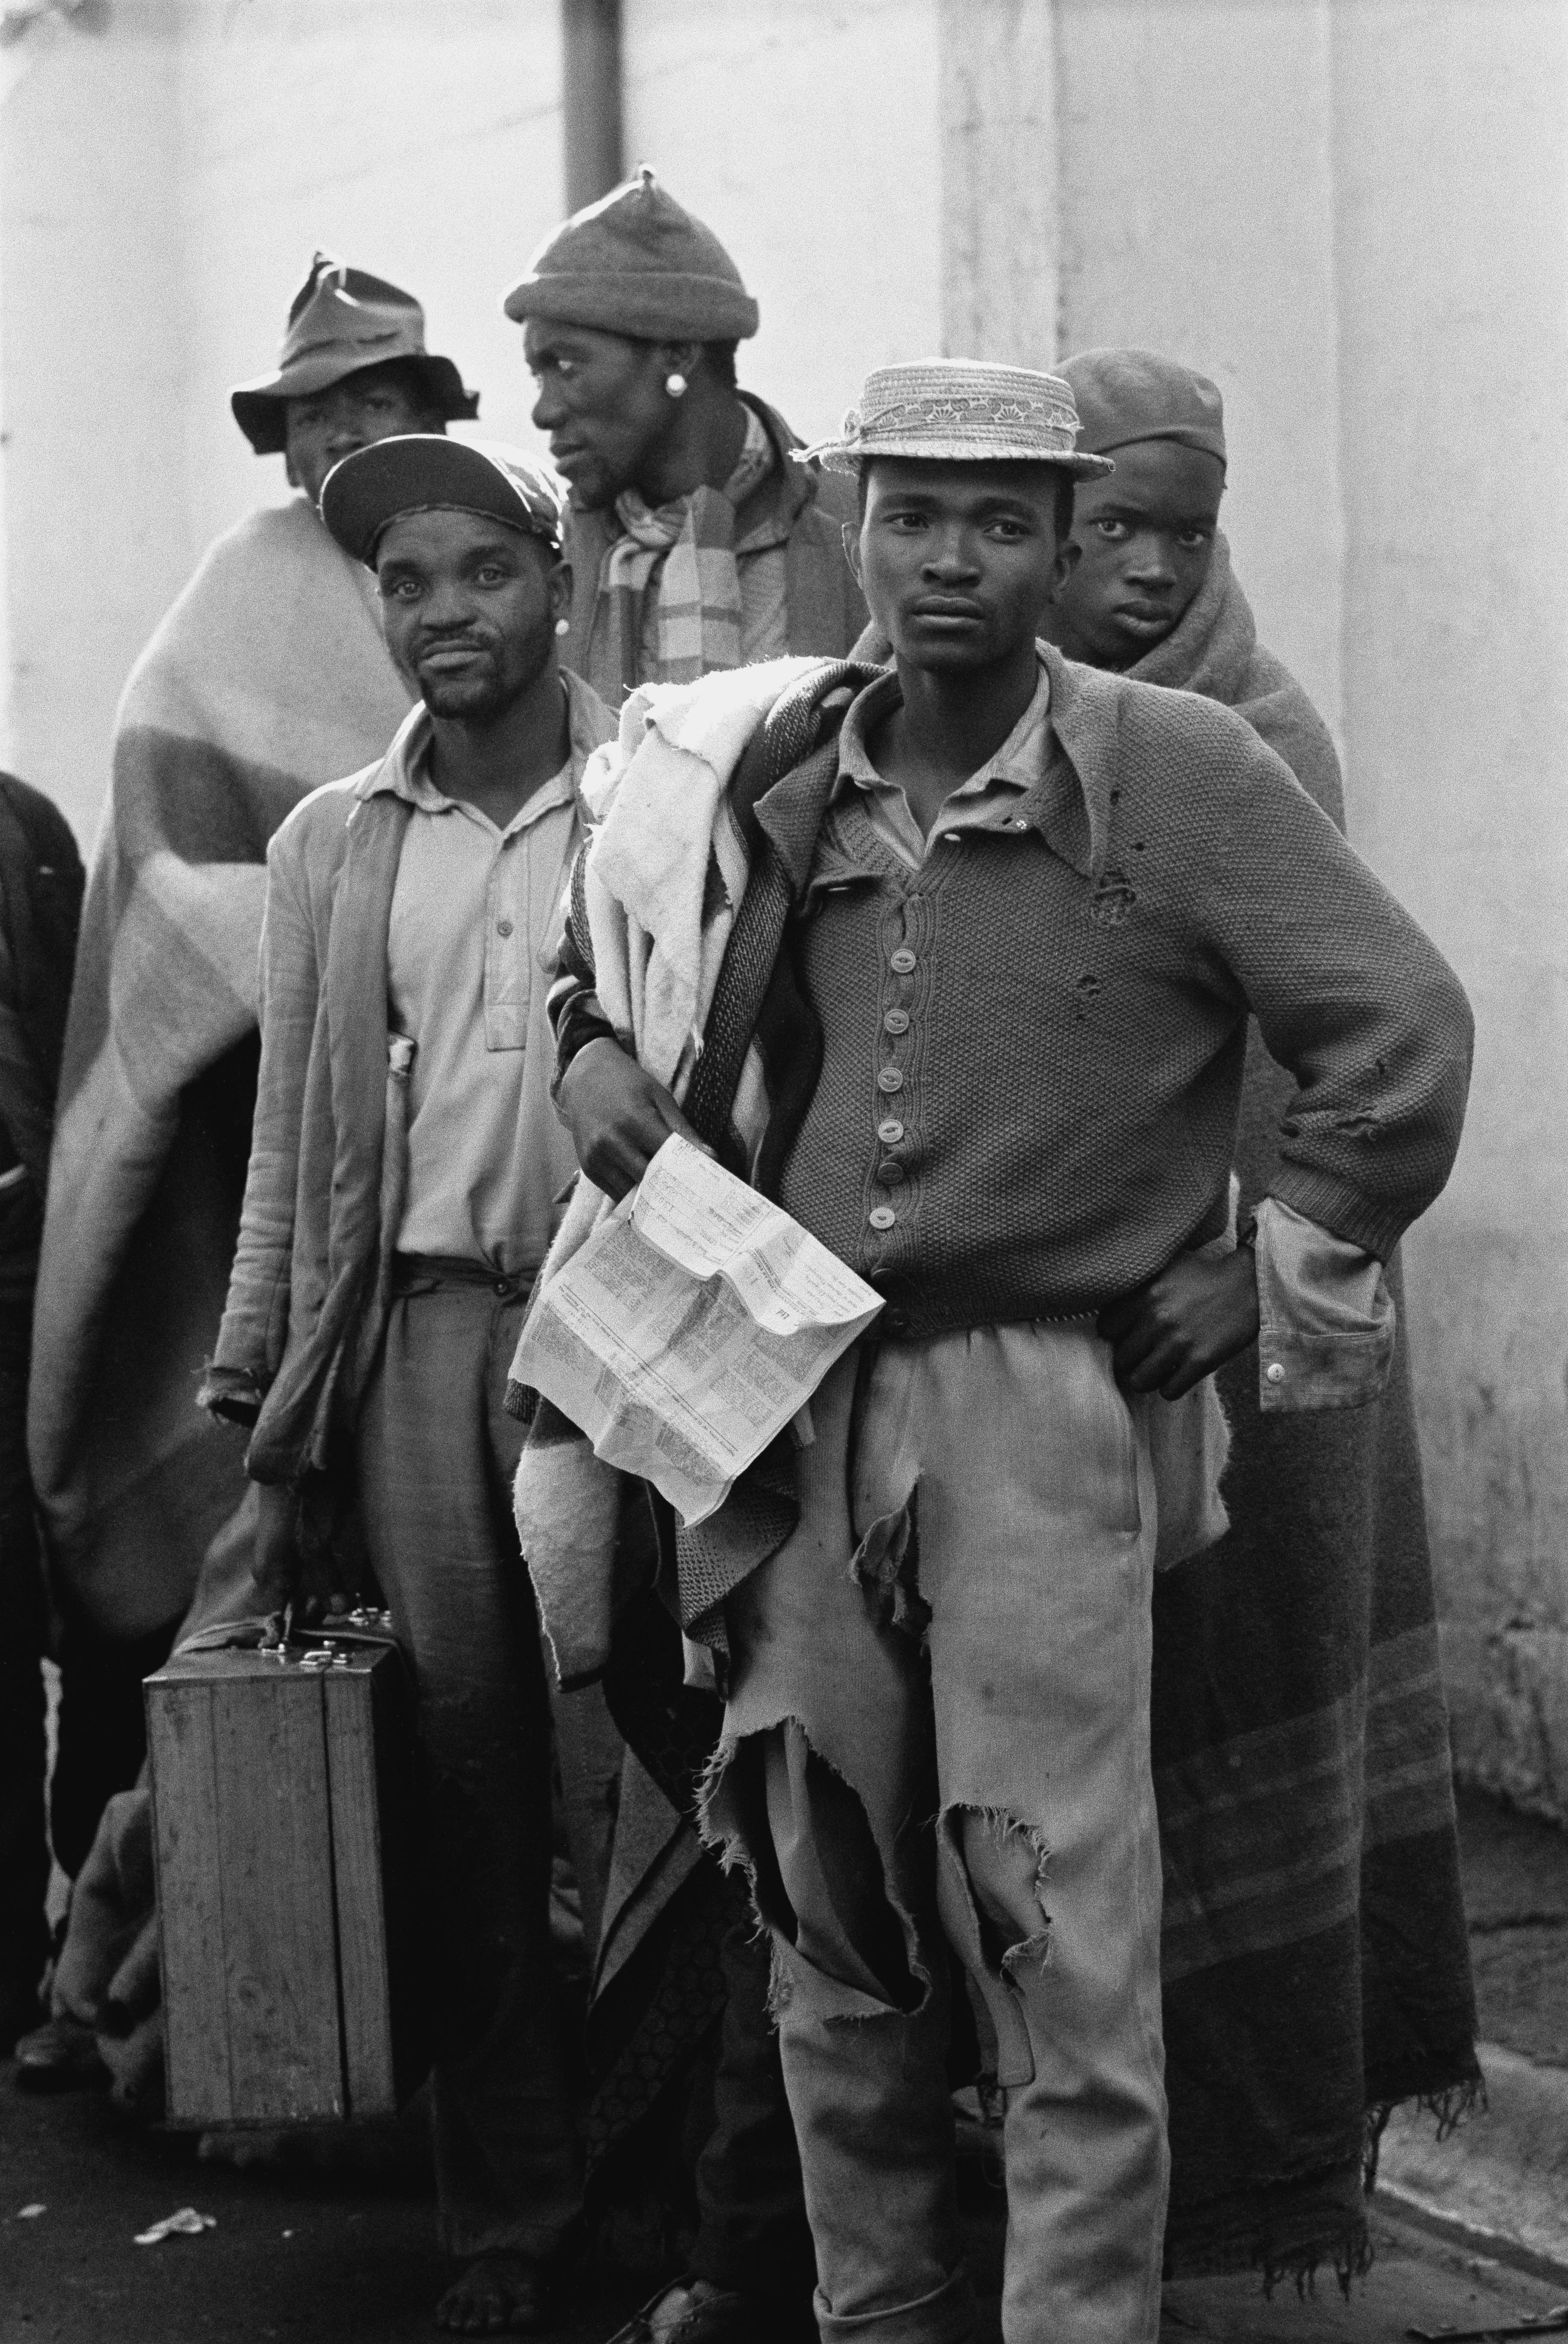 group of men with hats and suitcases